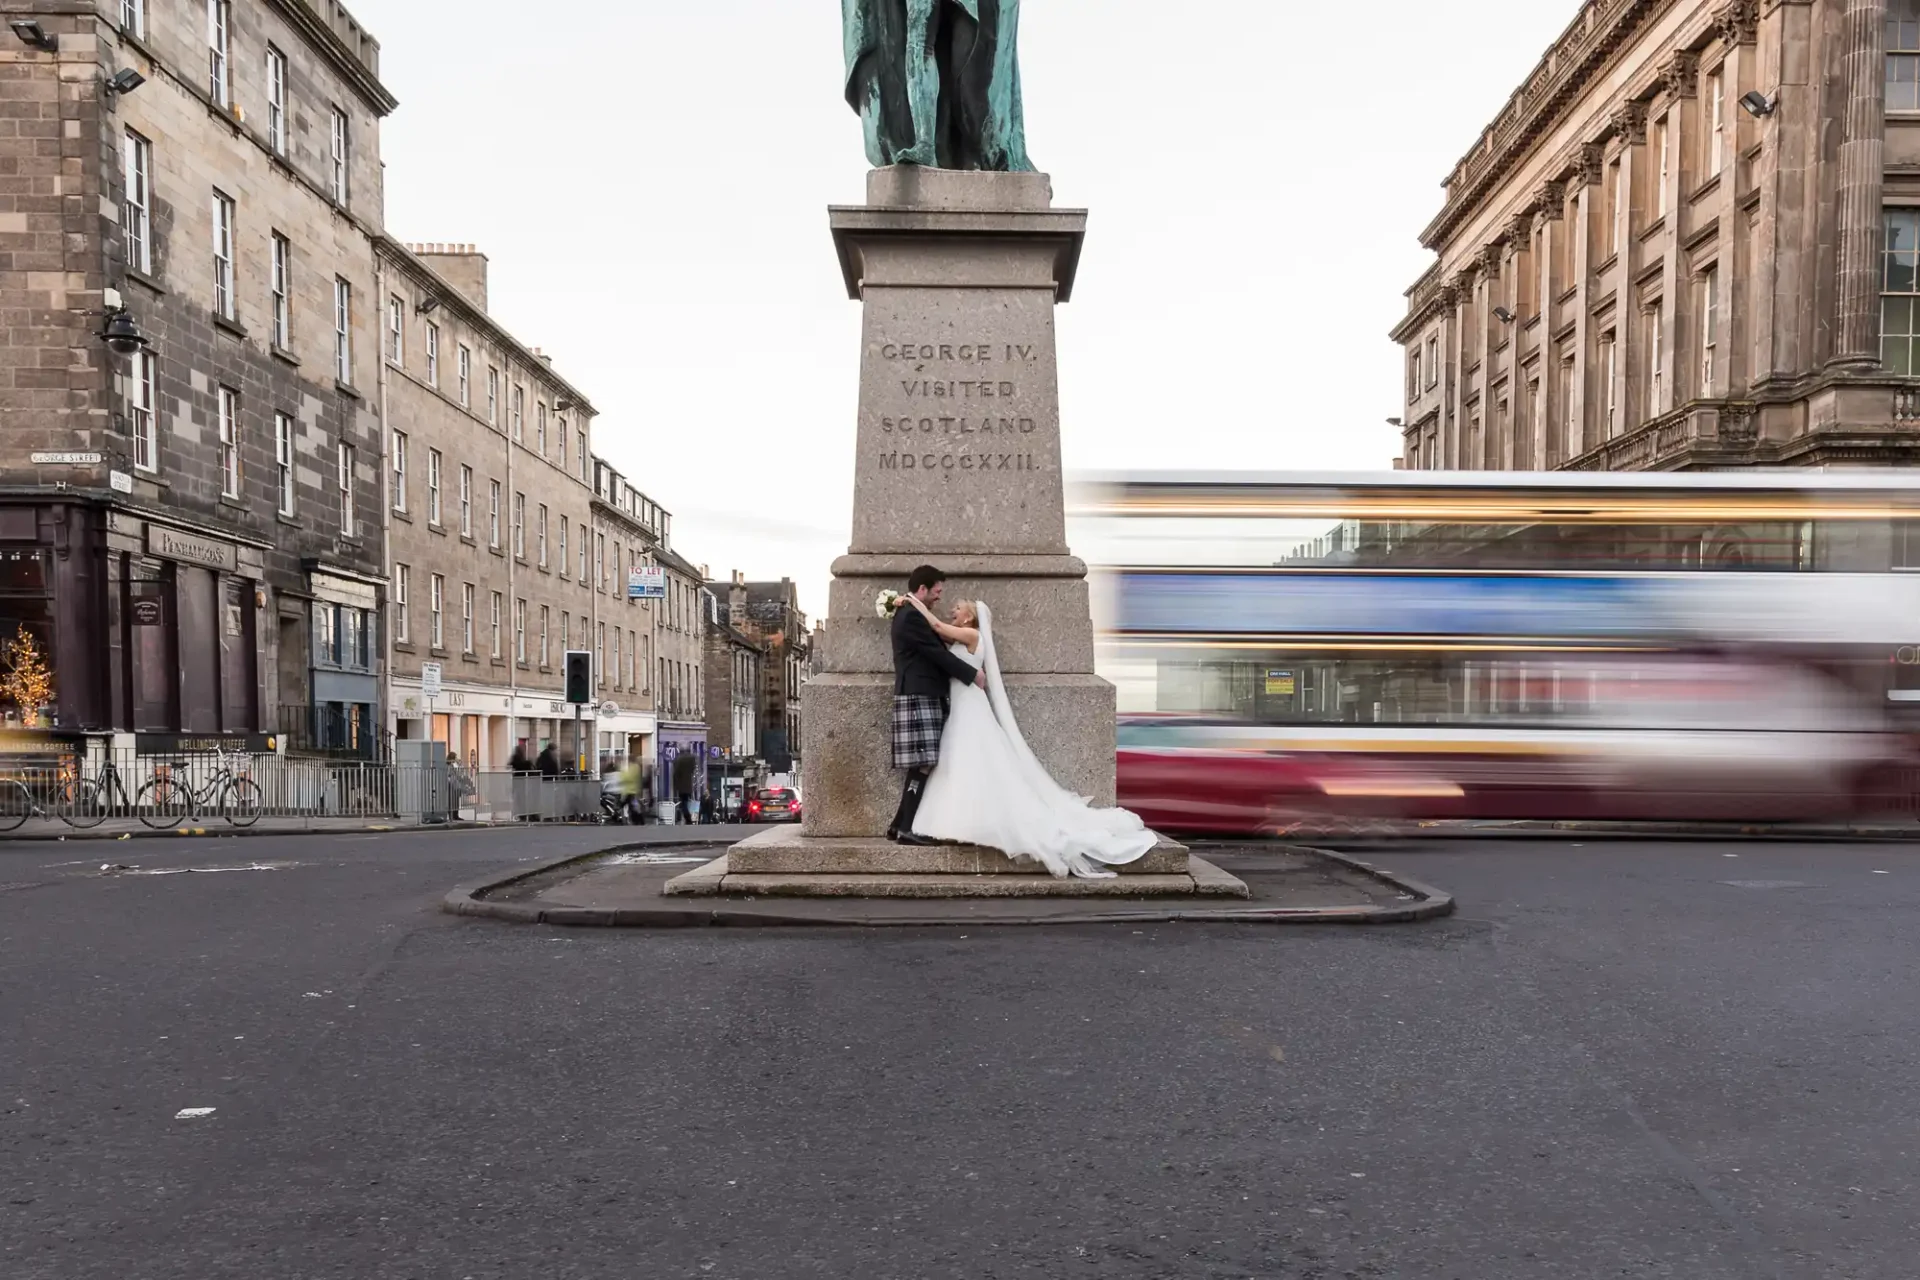 A newlywed couple poses for a photo at the base of a George IV statue, with a blurred bus passing by in the background.